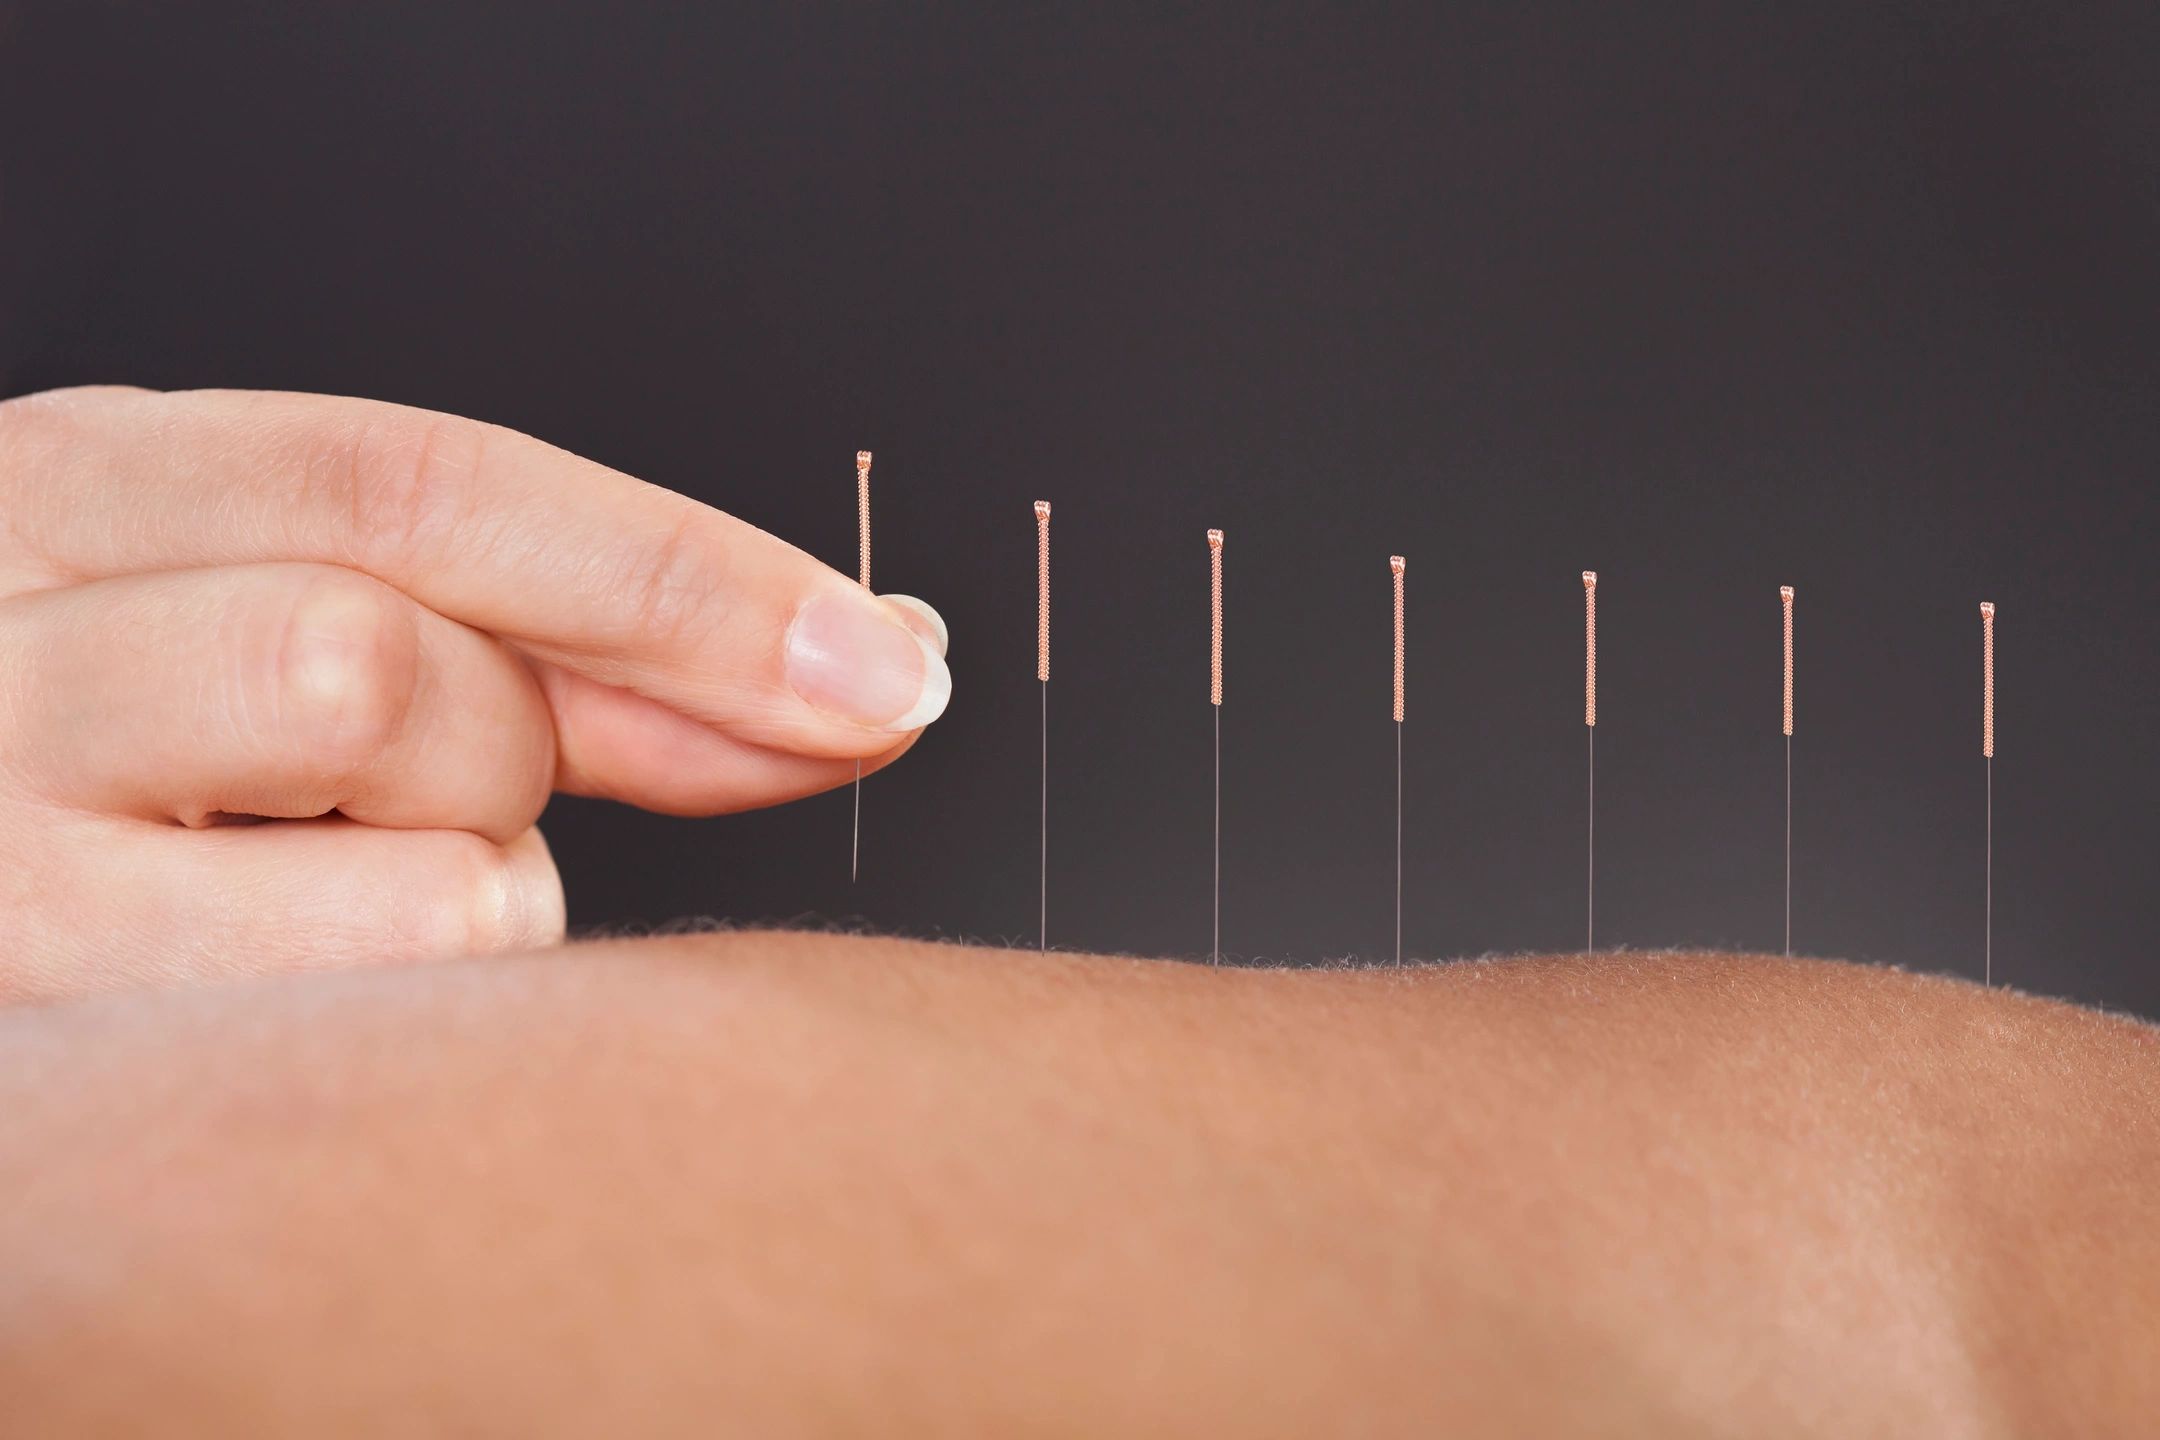 Clinical acupuncture, electroacupuncture, headaches, low back pain, sciatica, tendinopathy, TMJ neck